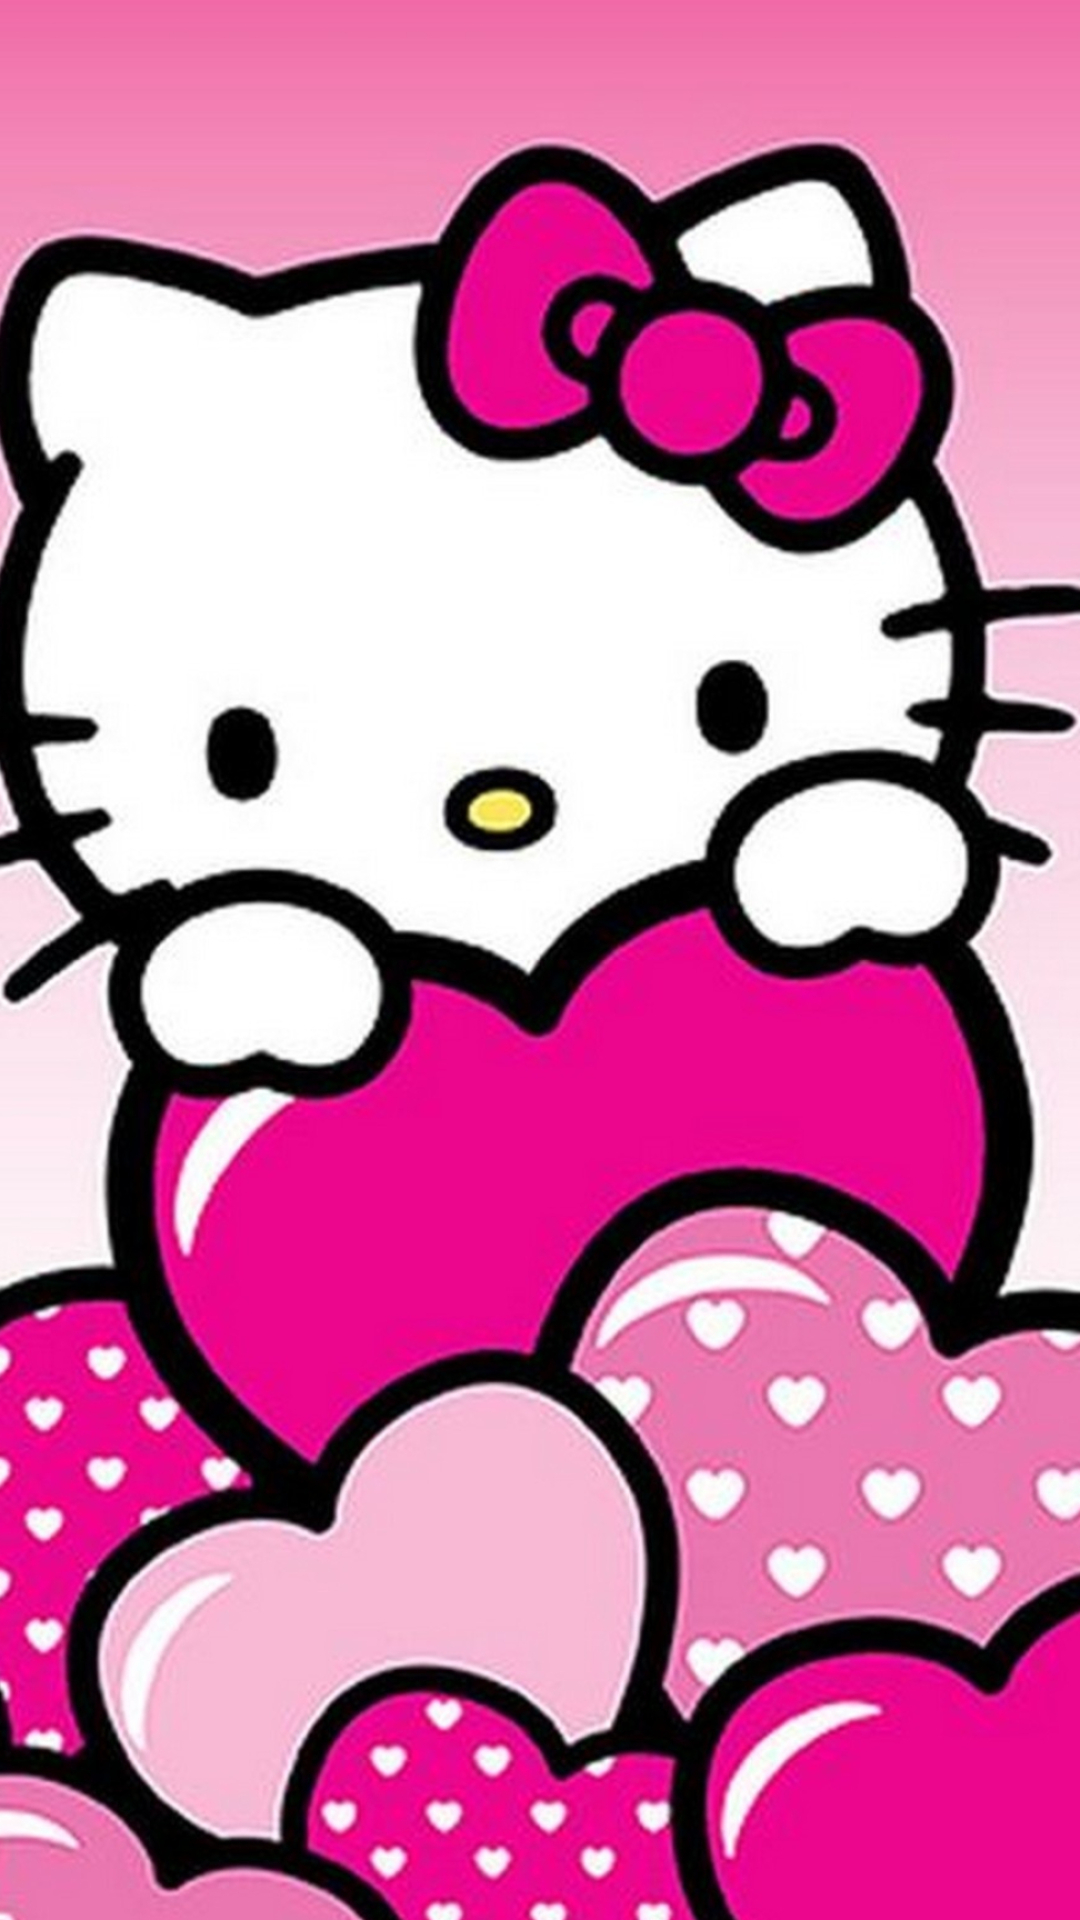 Hello Kitty, Valentine's Day delight, Adorable wallpapers, Love-themed art, 1080x1920 Full HD Handy